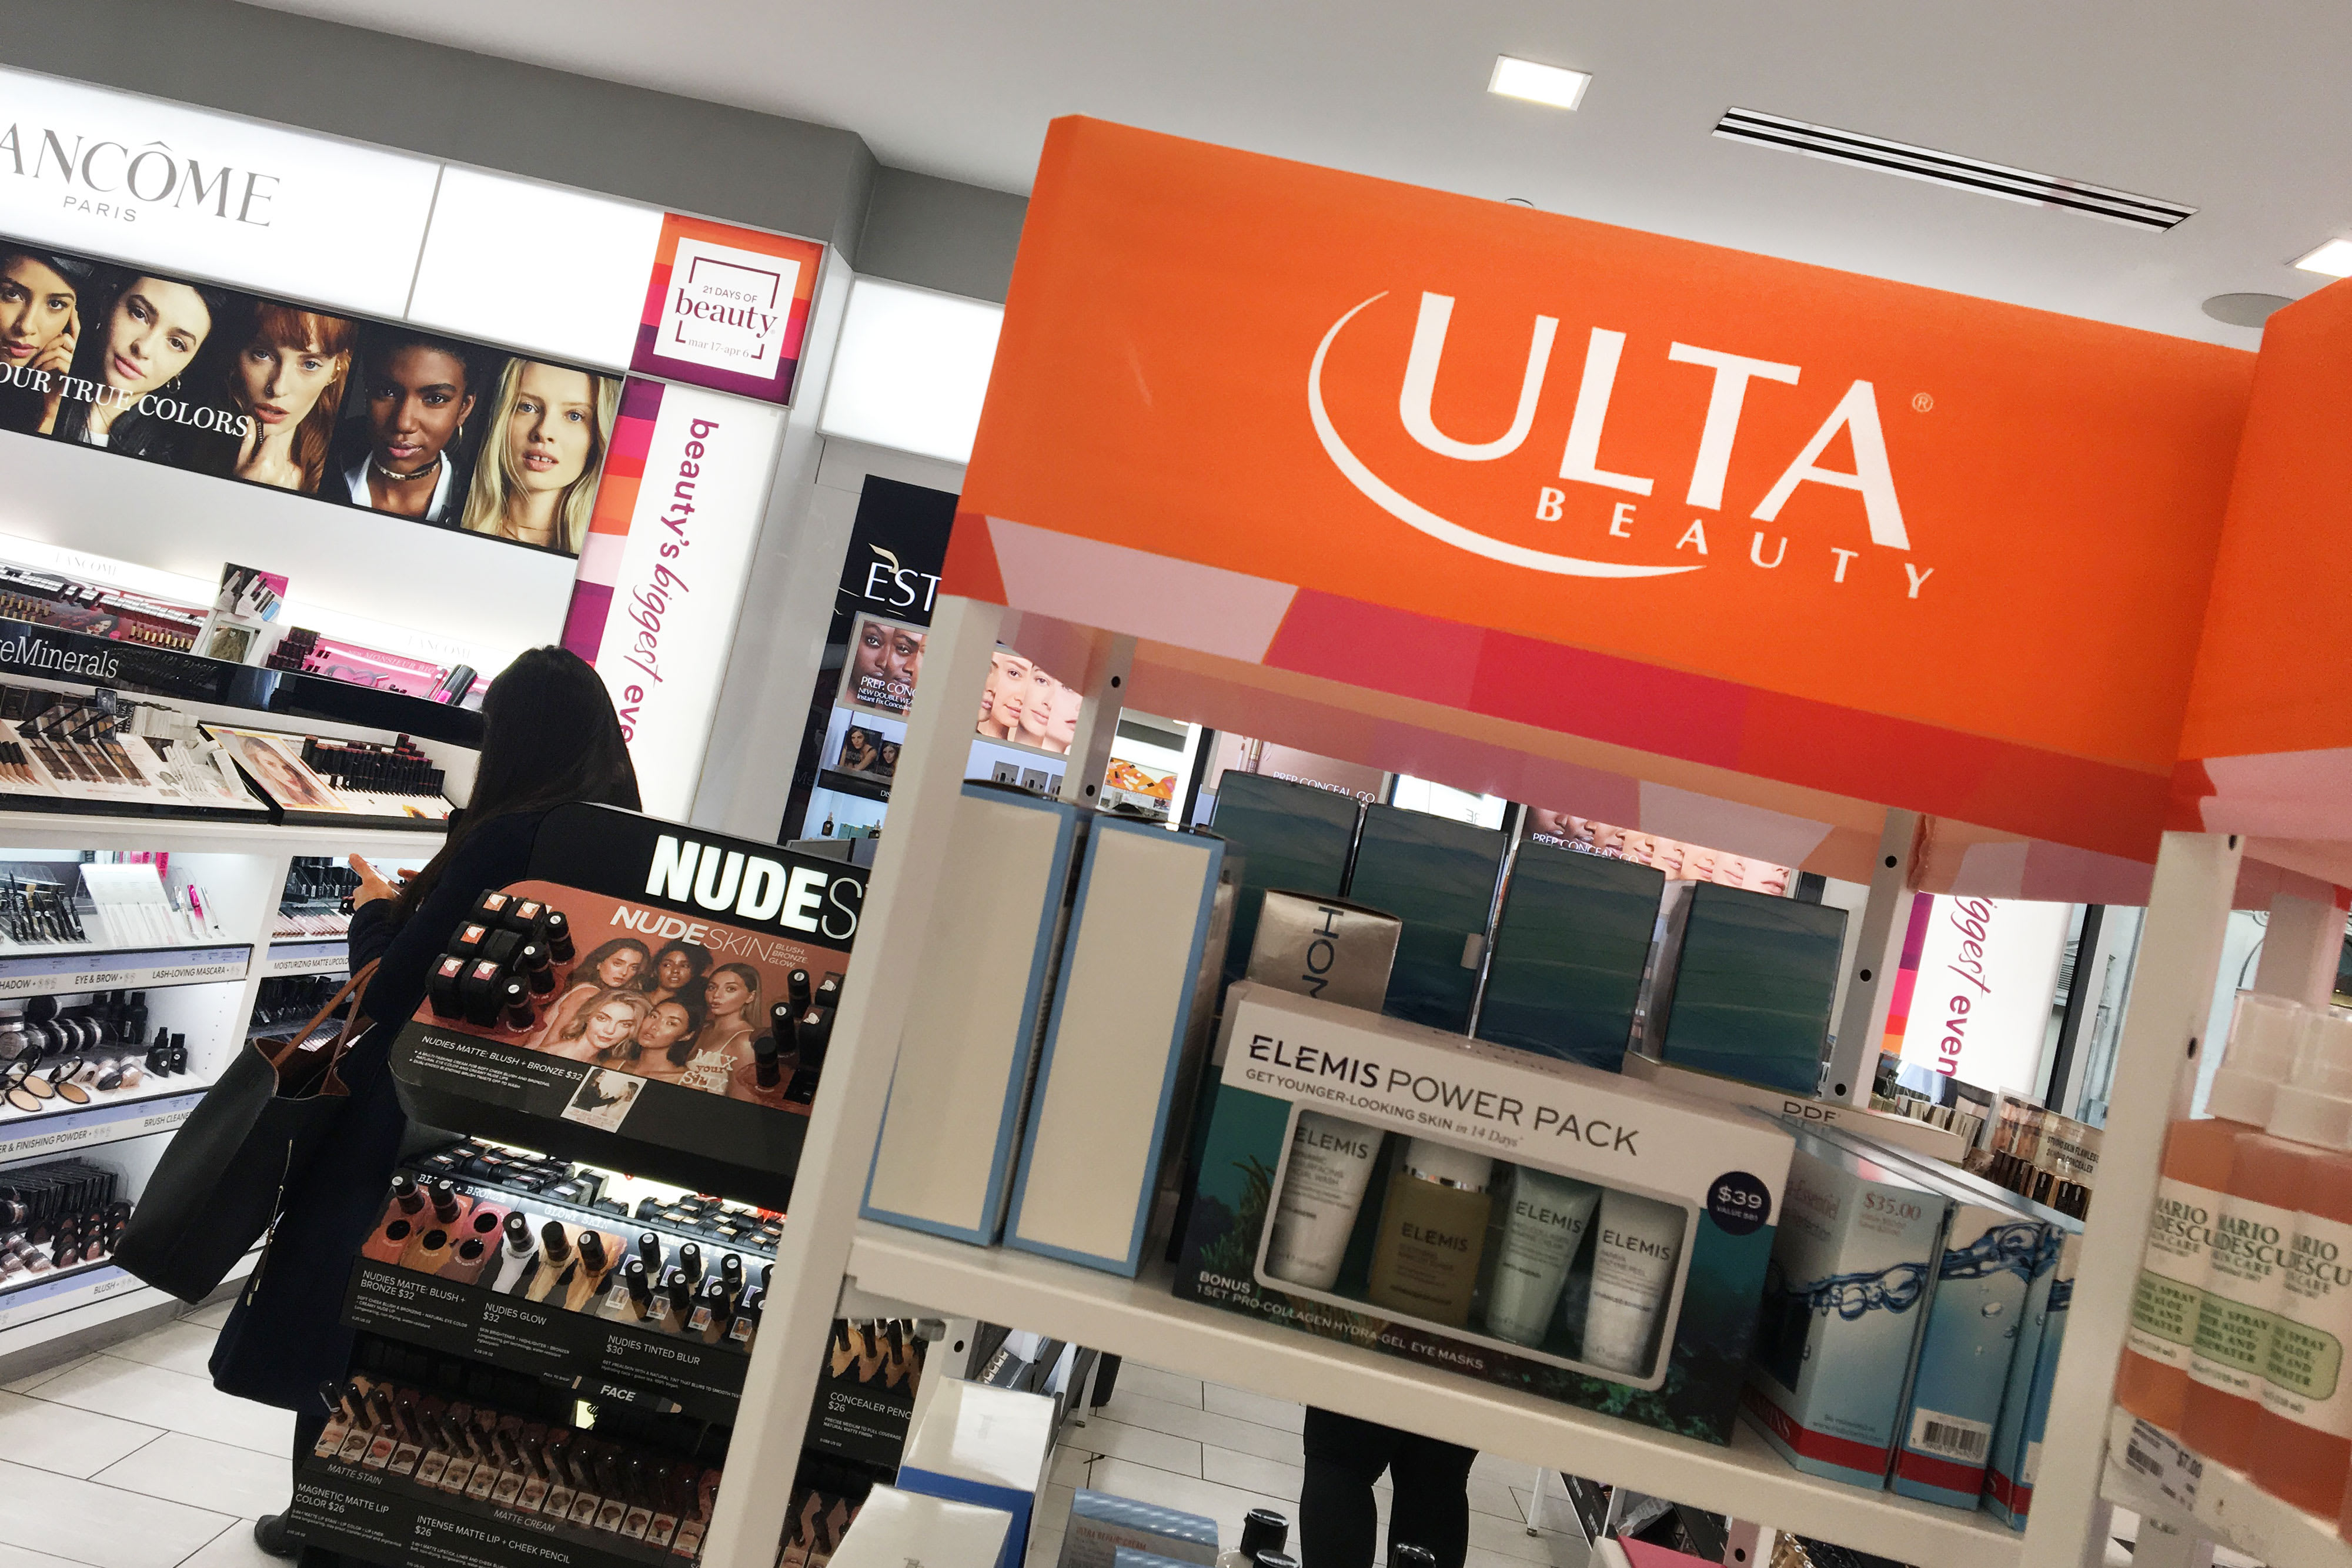 Ulta shares plummet as profit and sales miss expectations and company slashes outlook